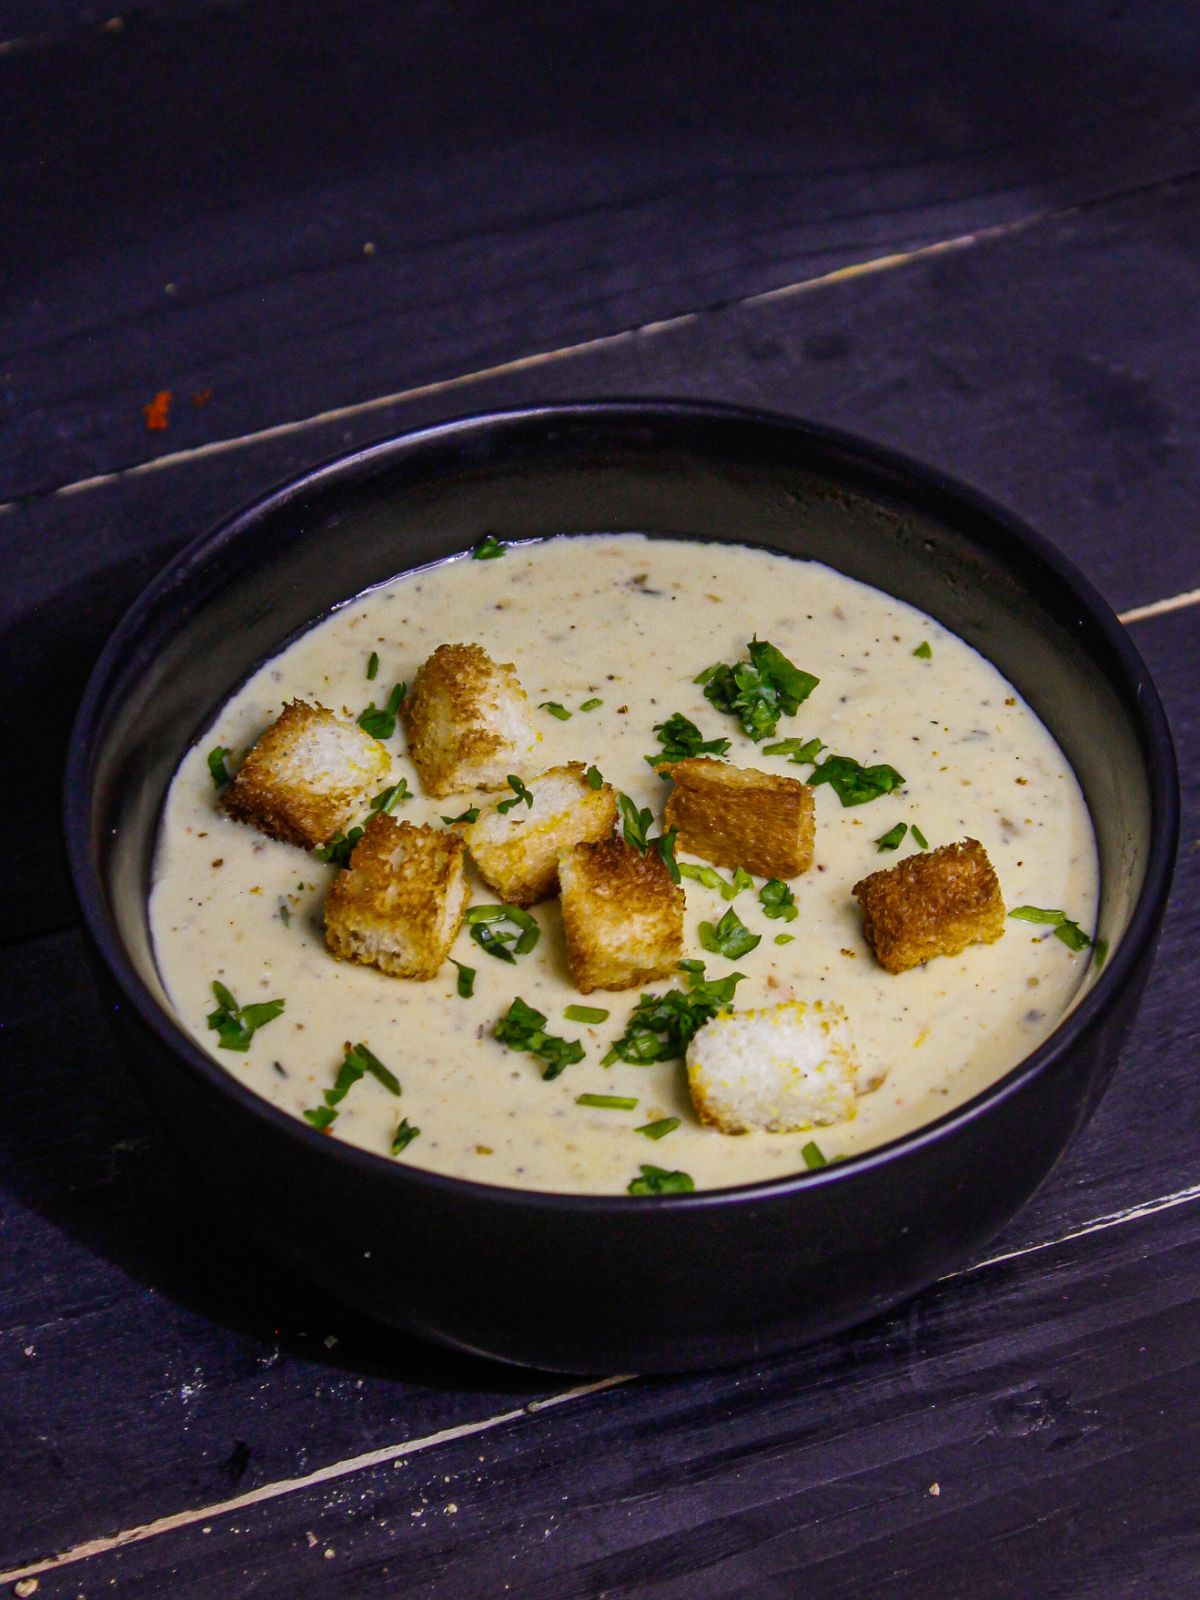 Yummy Instant Pot Creamy Cauliflower Soup served with Croutons and coriander leaves  